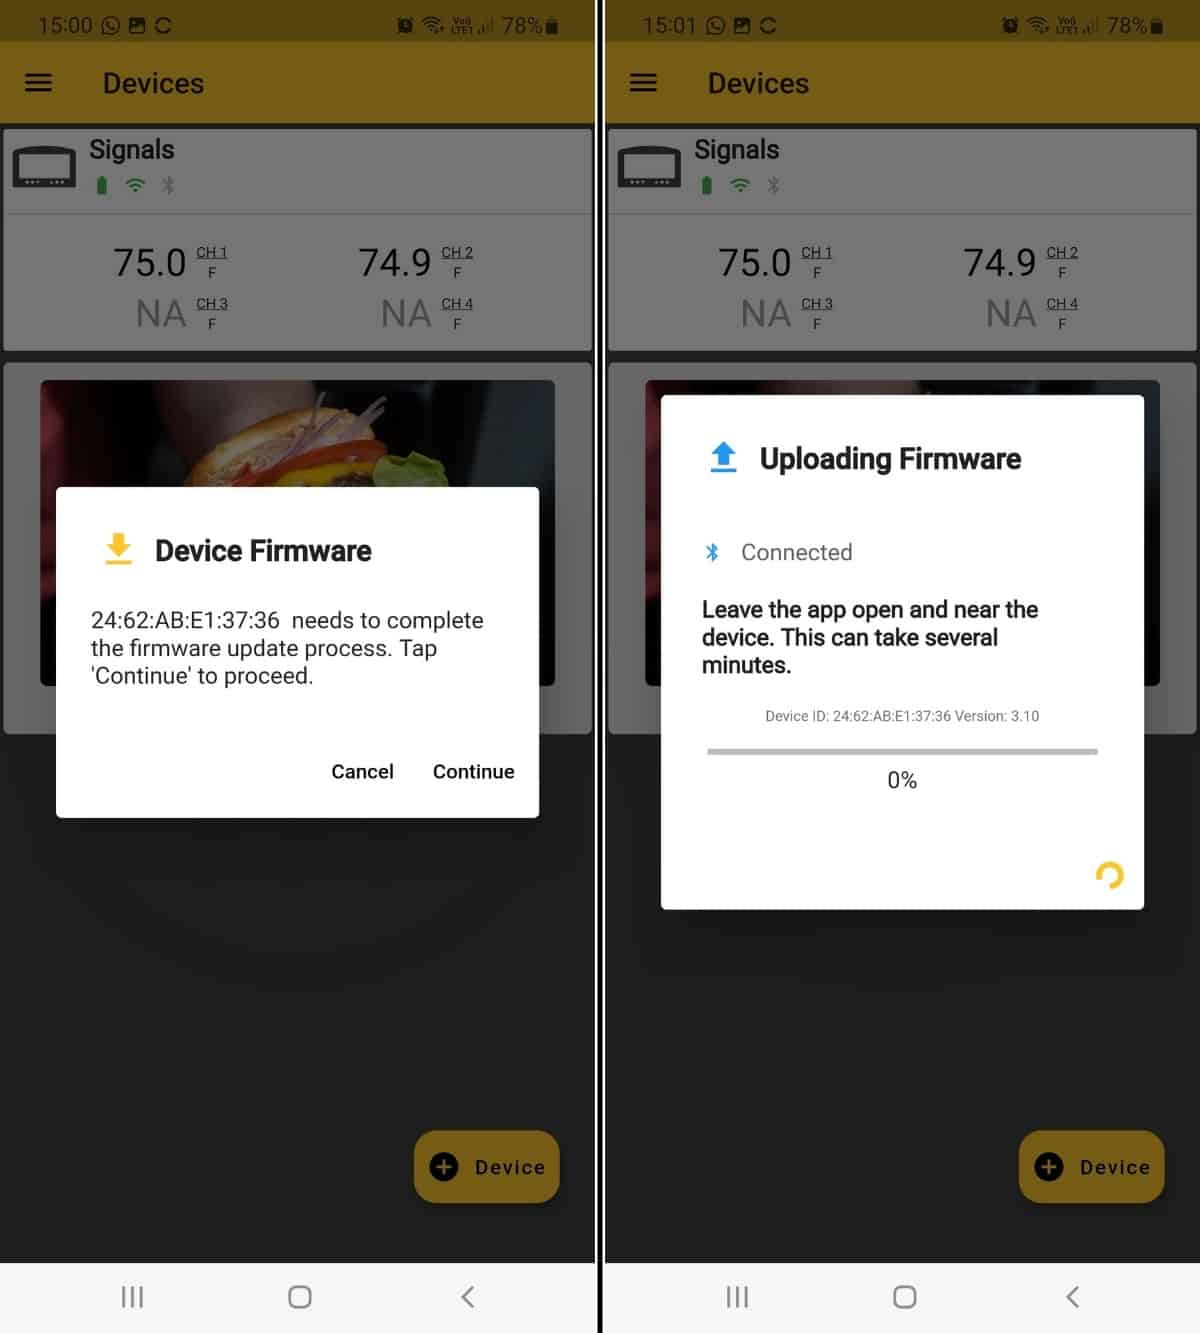 Thermoworks app screenshots showing the firmware update process, stages 3 and 4